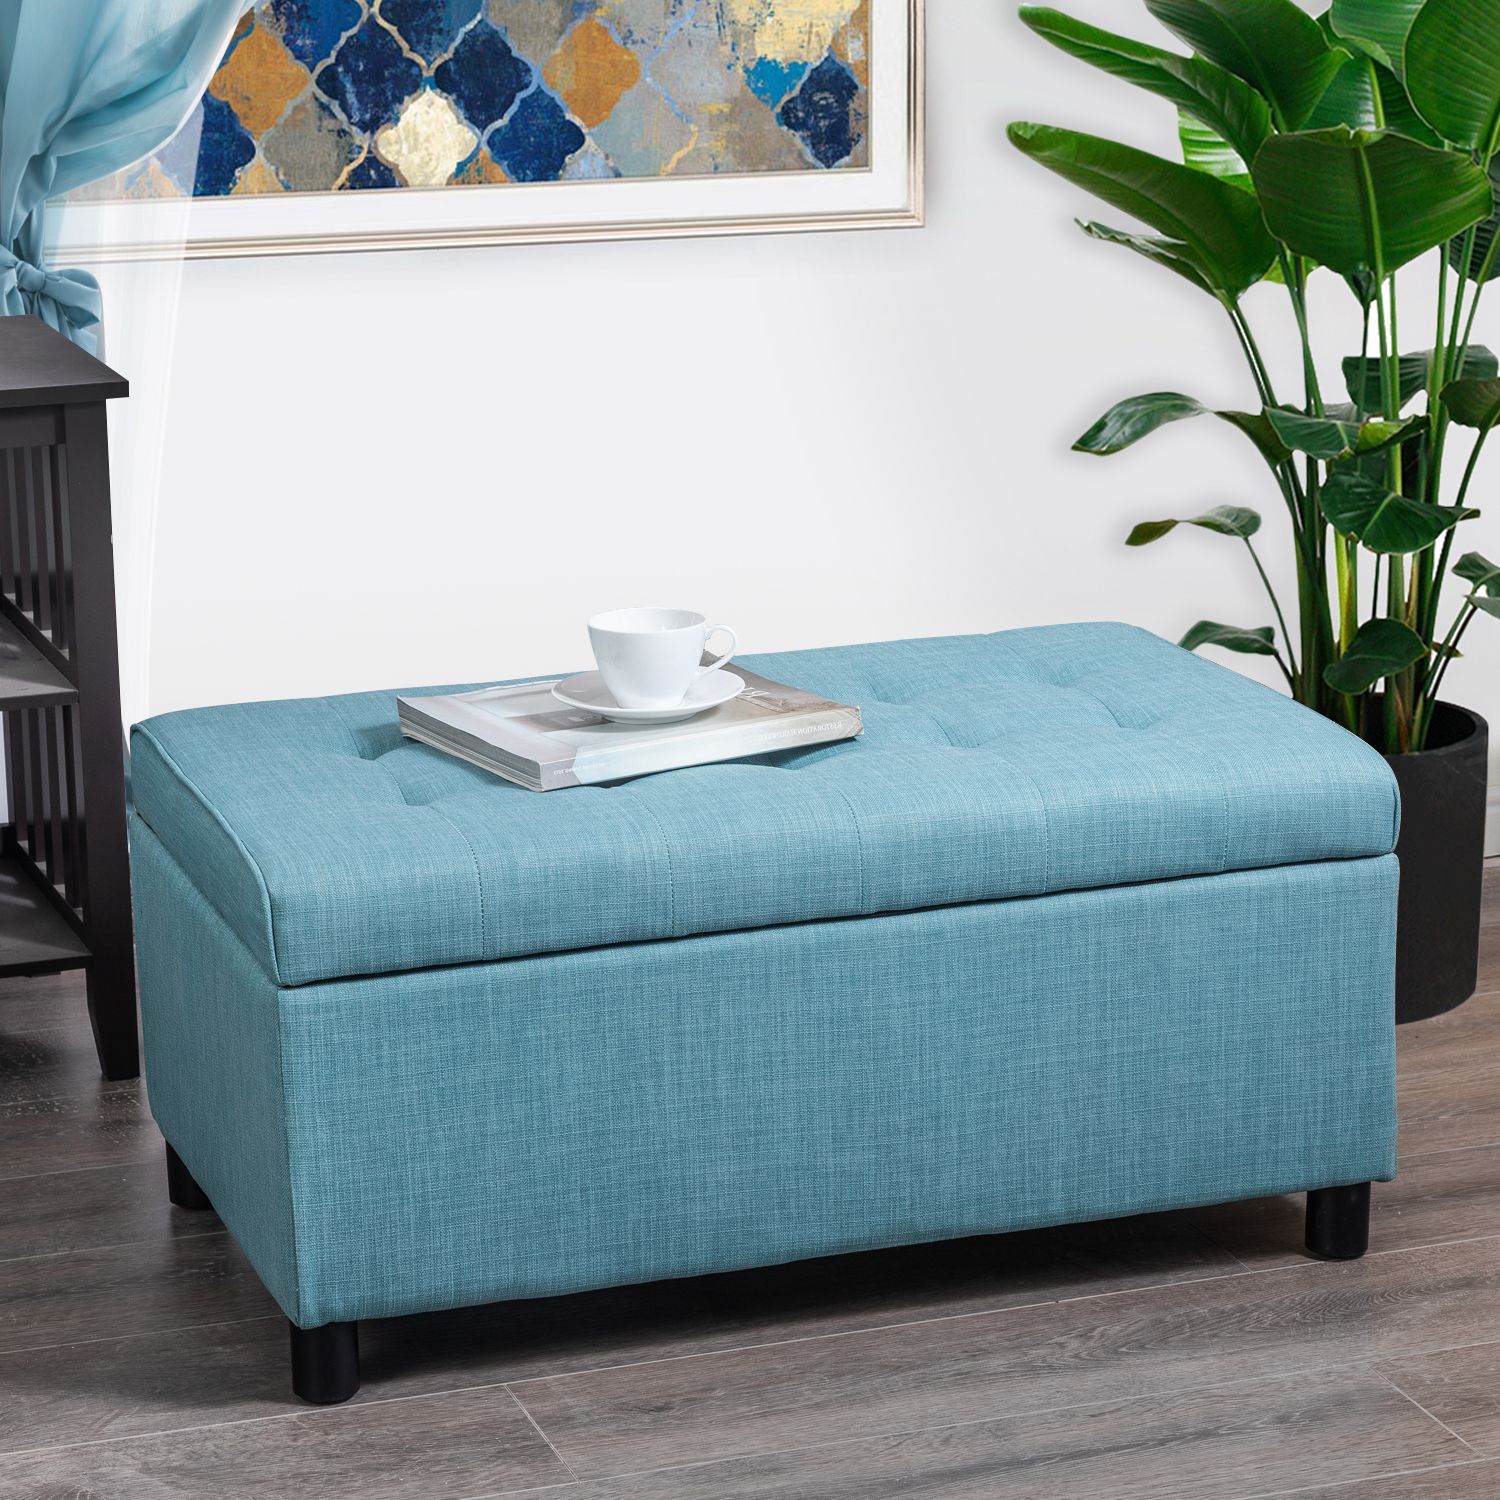 Fashionable Joveco Classic Tufted Fabric Rectangular Ottoman Bench With Large Throughout Fabric Storage Ottomans (View 2 of 10)